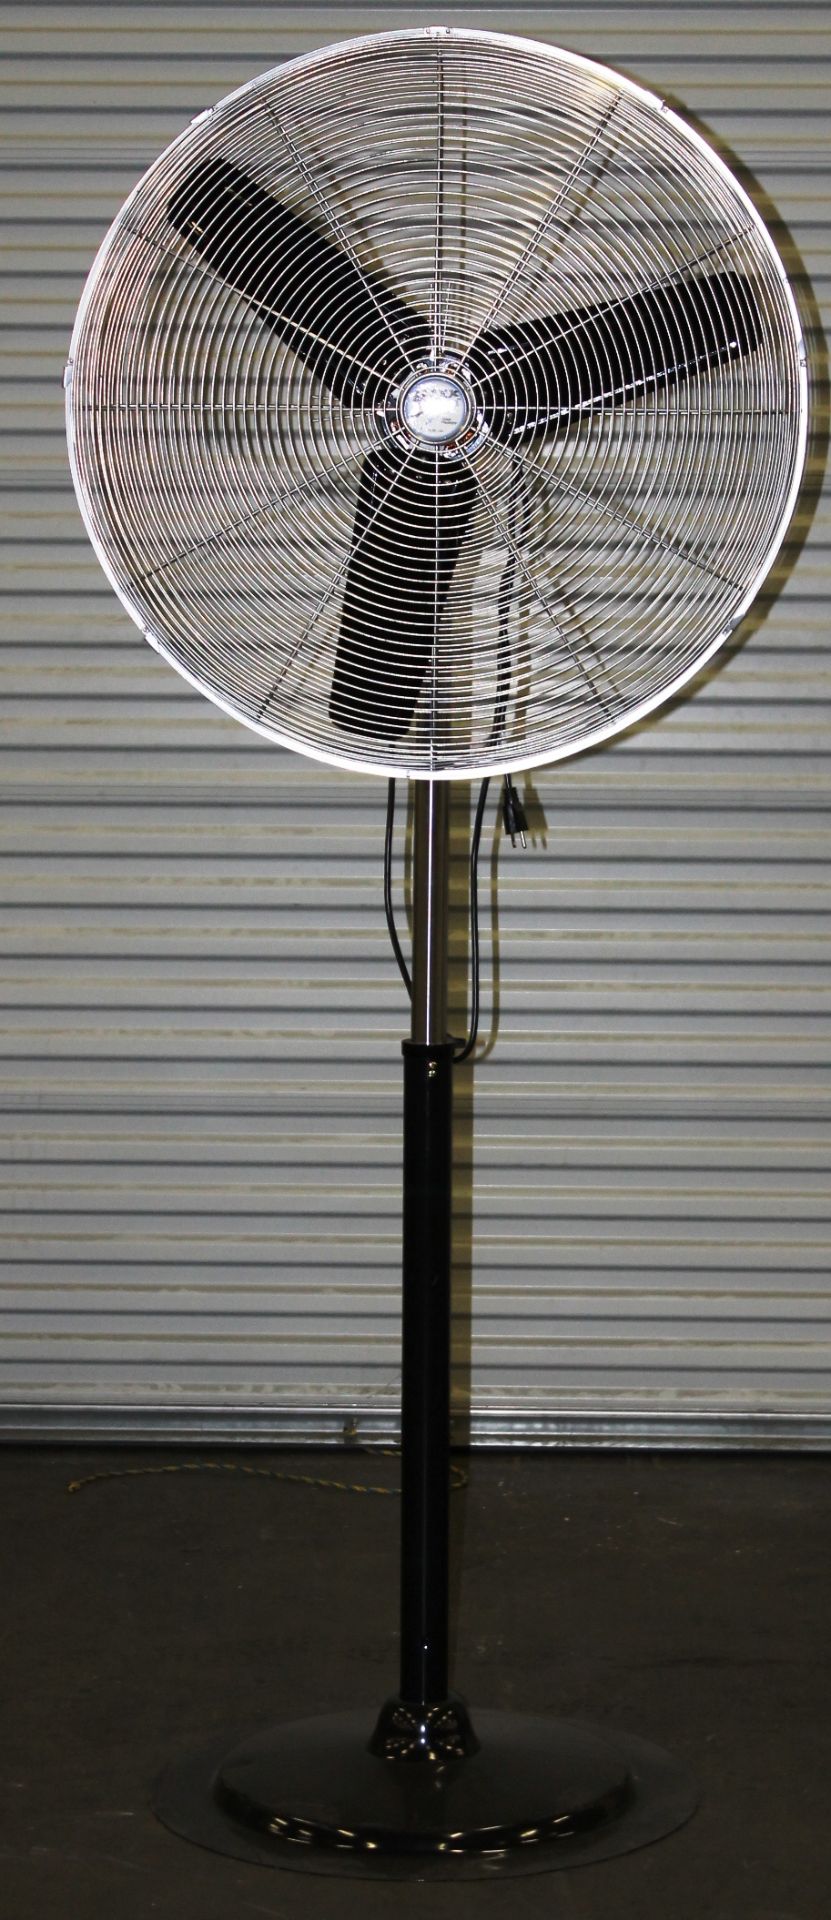 HIGH VELOCITY 30" PEDESTAL FAN,  HEAVY DUTY 3-SPEED THERMALLY PROTECTED MOTOR, POWERFUL AIRFLOW: - Image 3 of 3